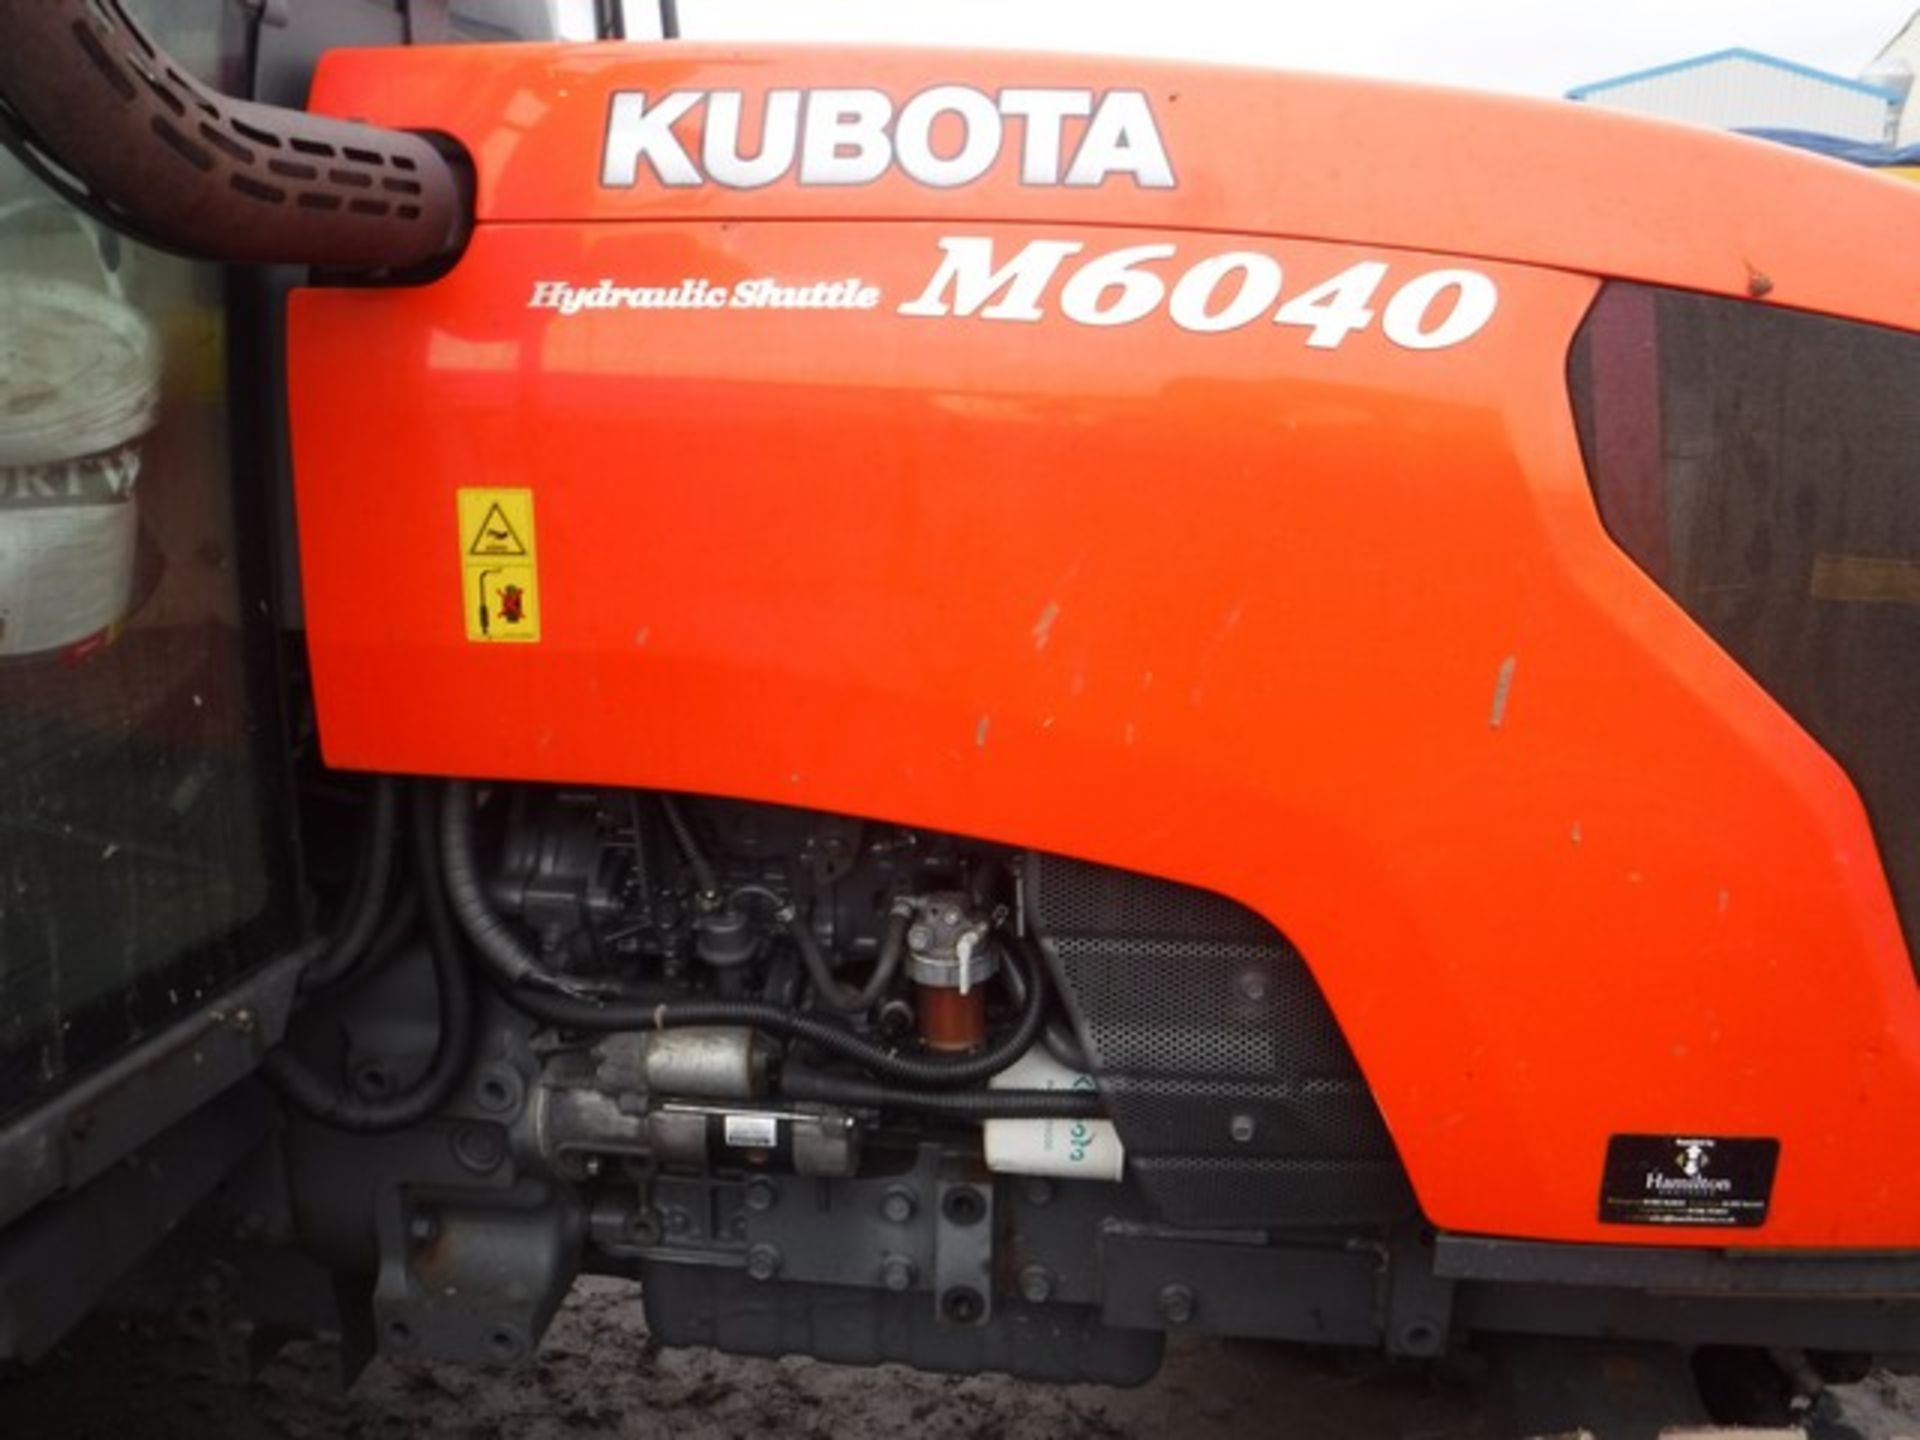 2013 KUBOTA M6040H-C AAGRIC TRACTOR REG - SF13EYJ - 6828HRS - Image 3 of 10